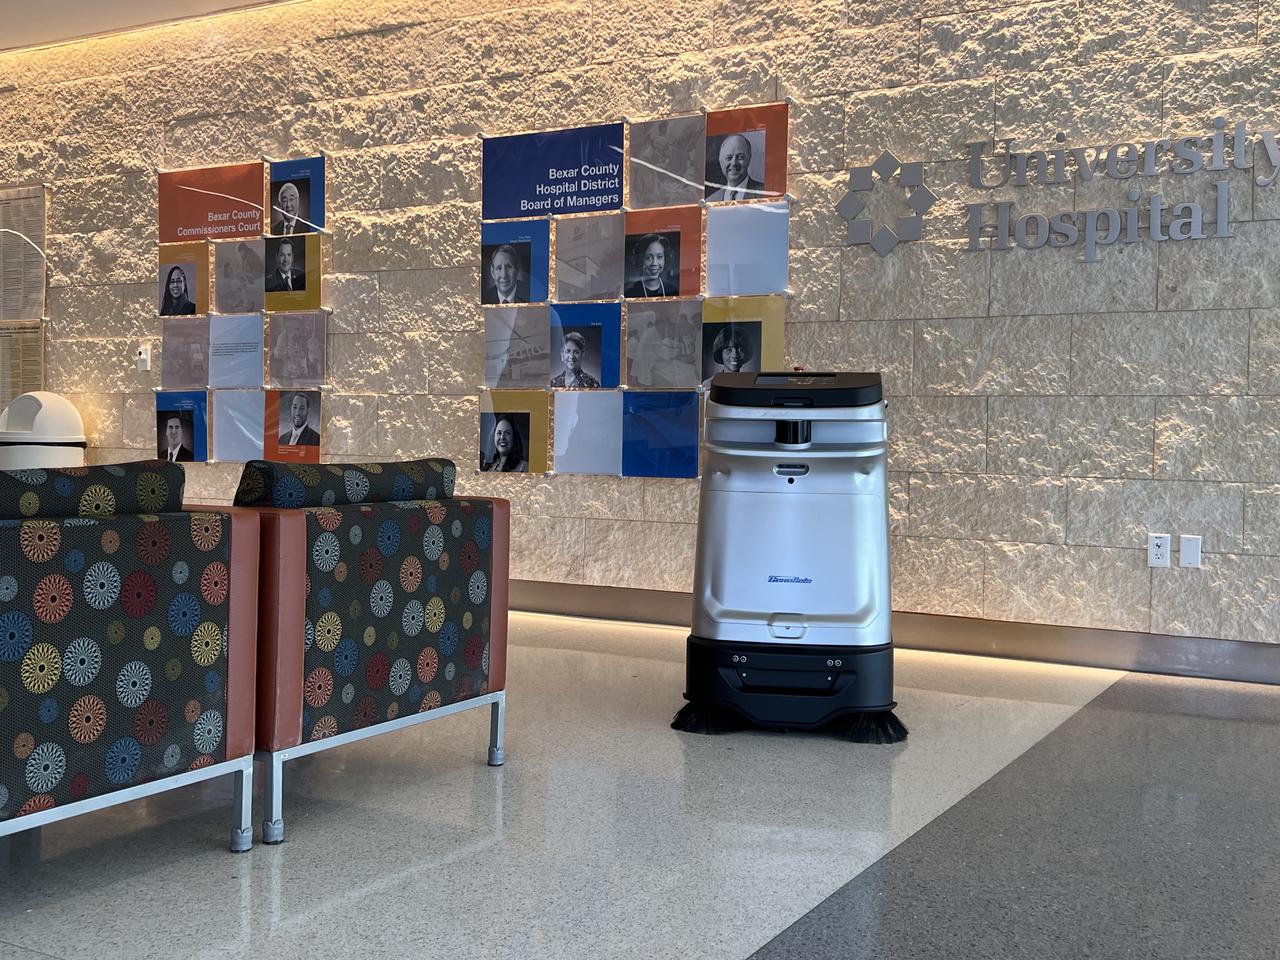 SP50 helps University Hospital in TX optimize cleaning - Cenobots